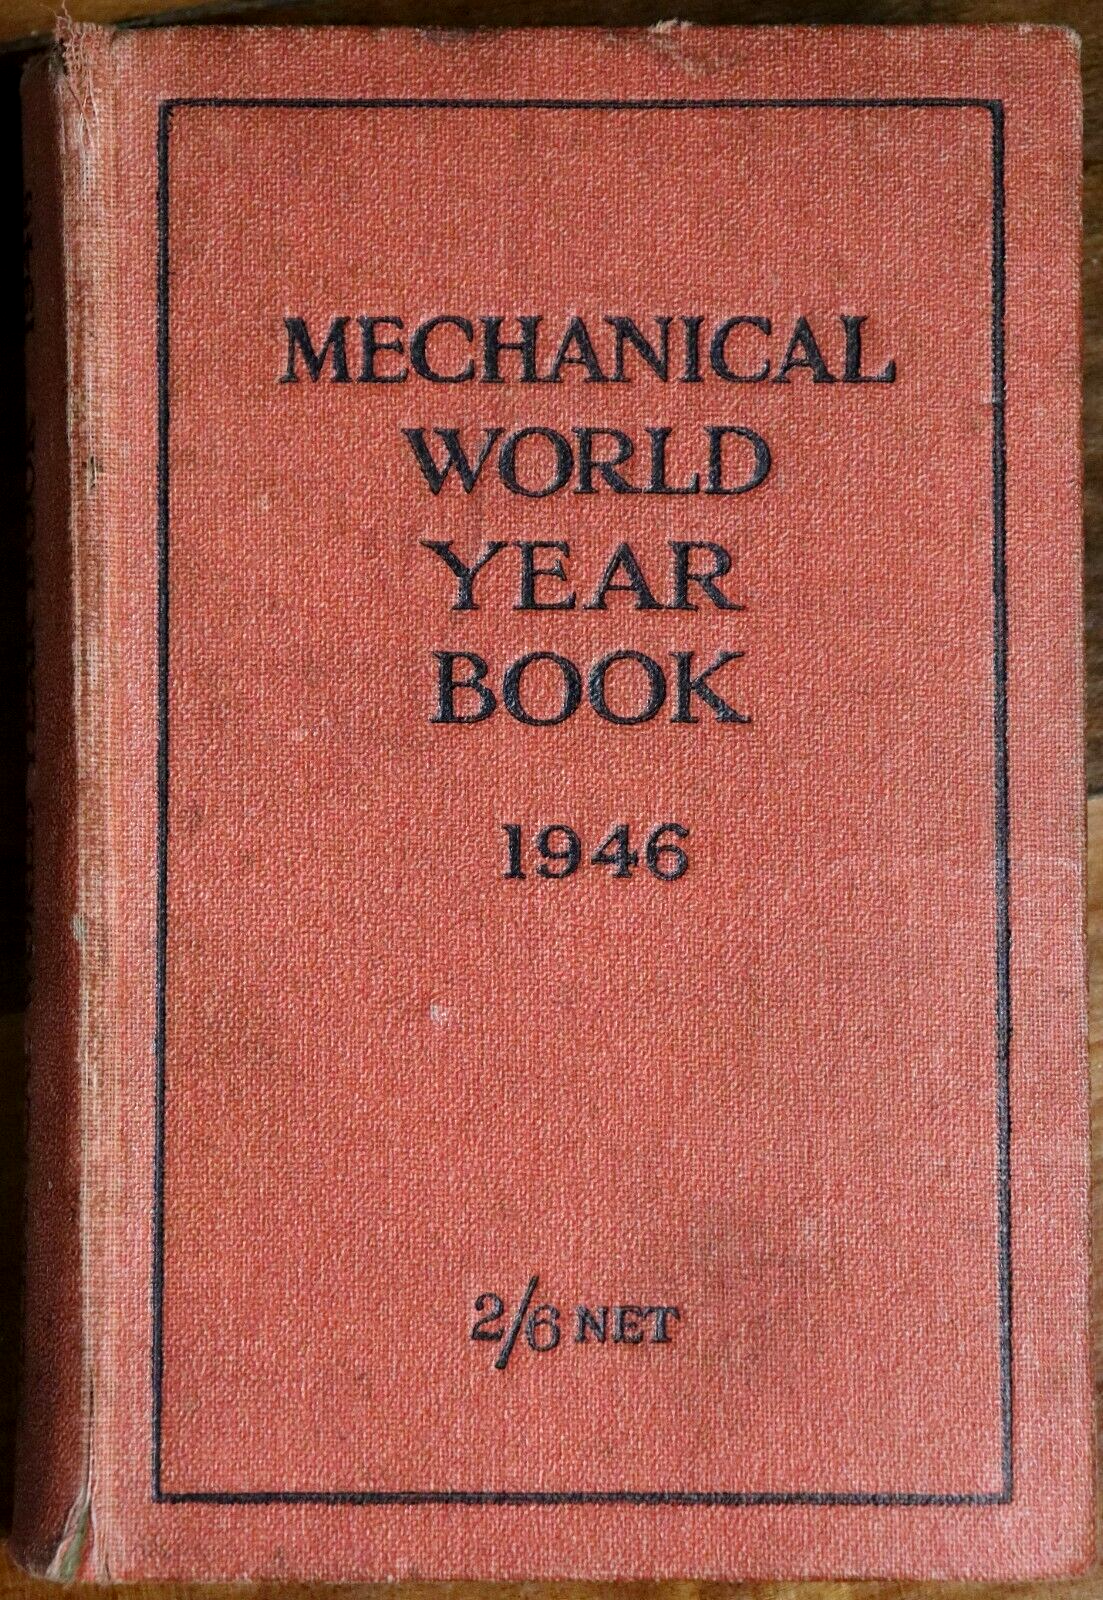 Mechanical World Year Book - 1946 - Technical Reference Book